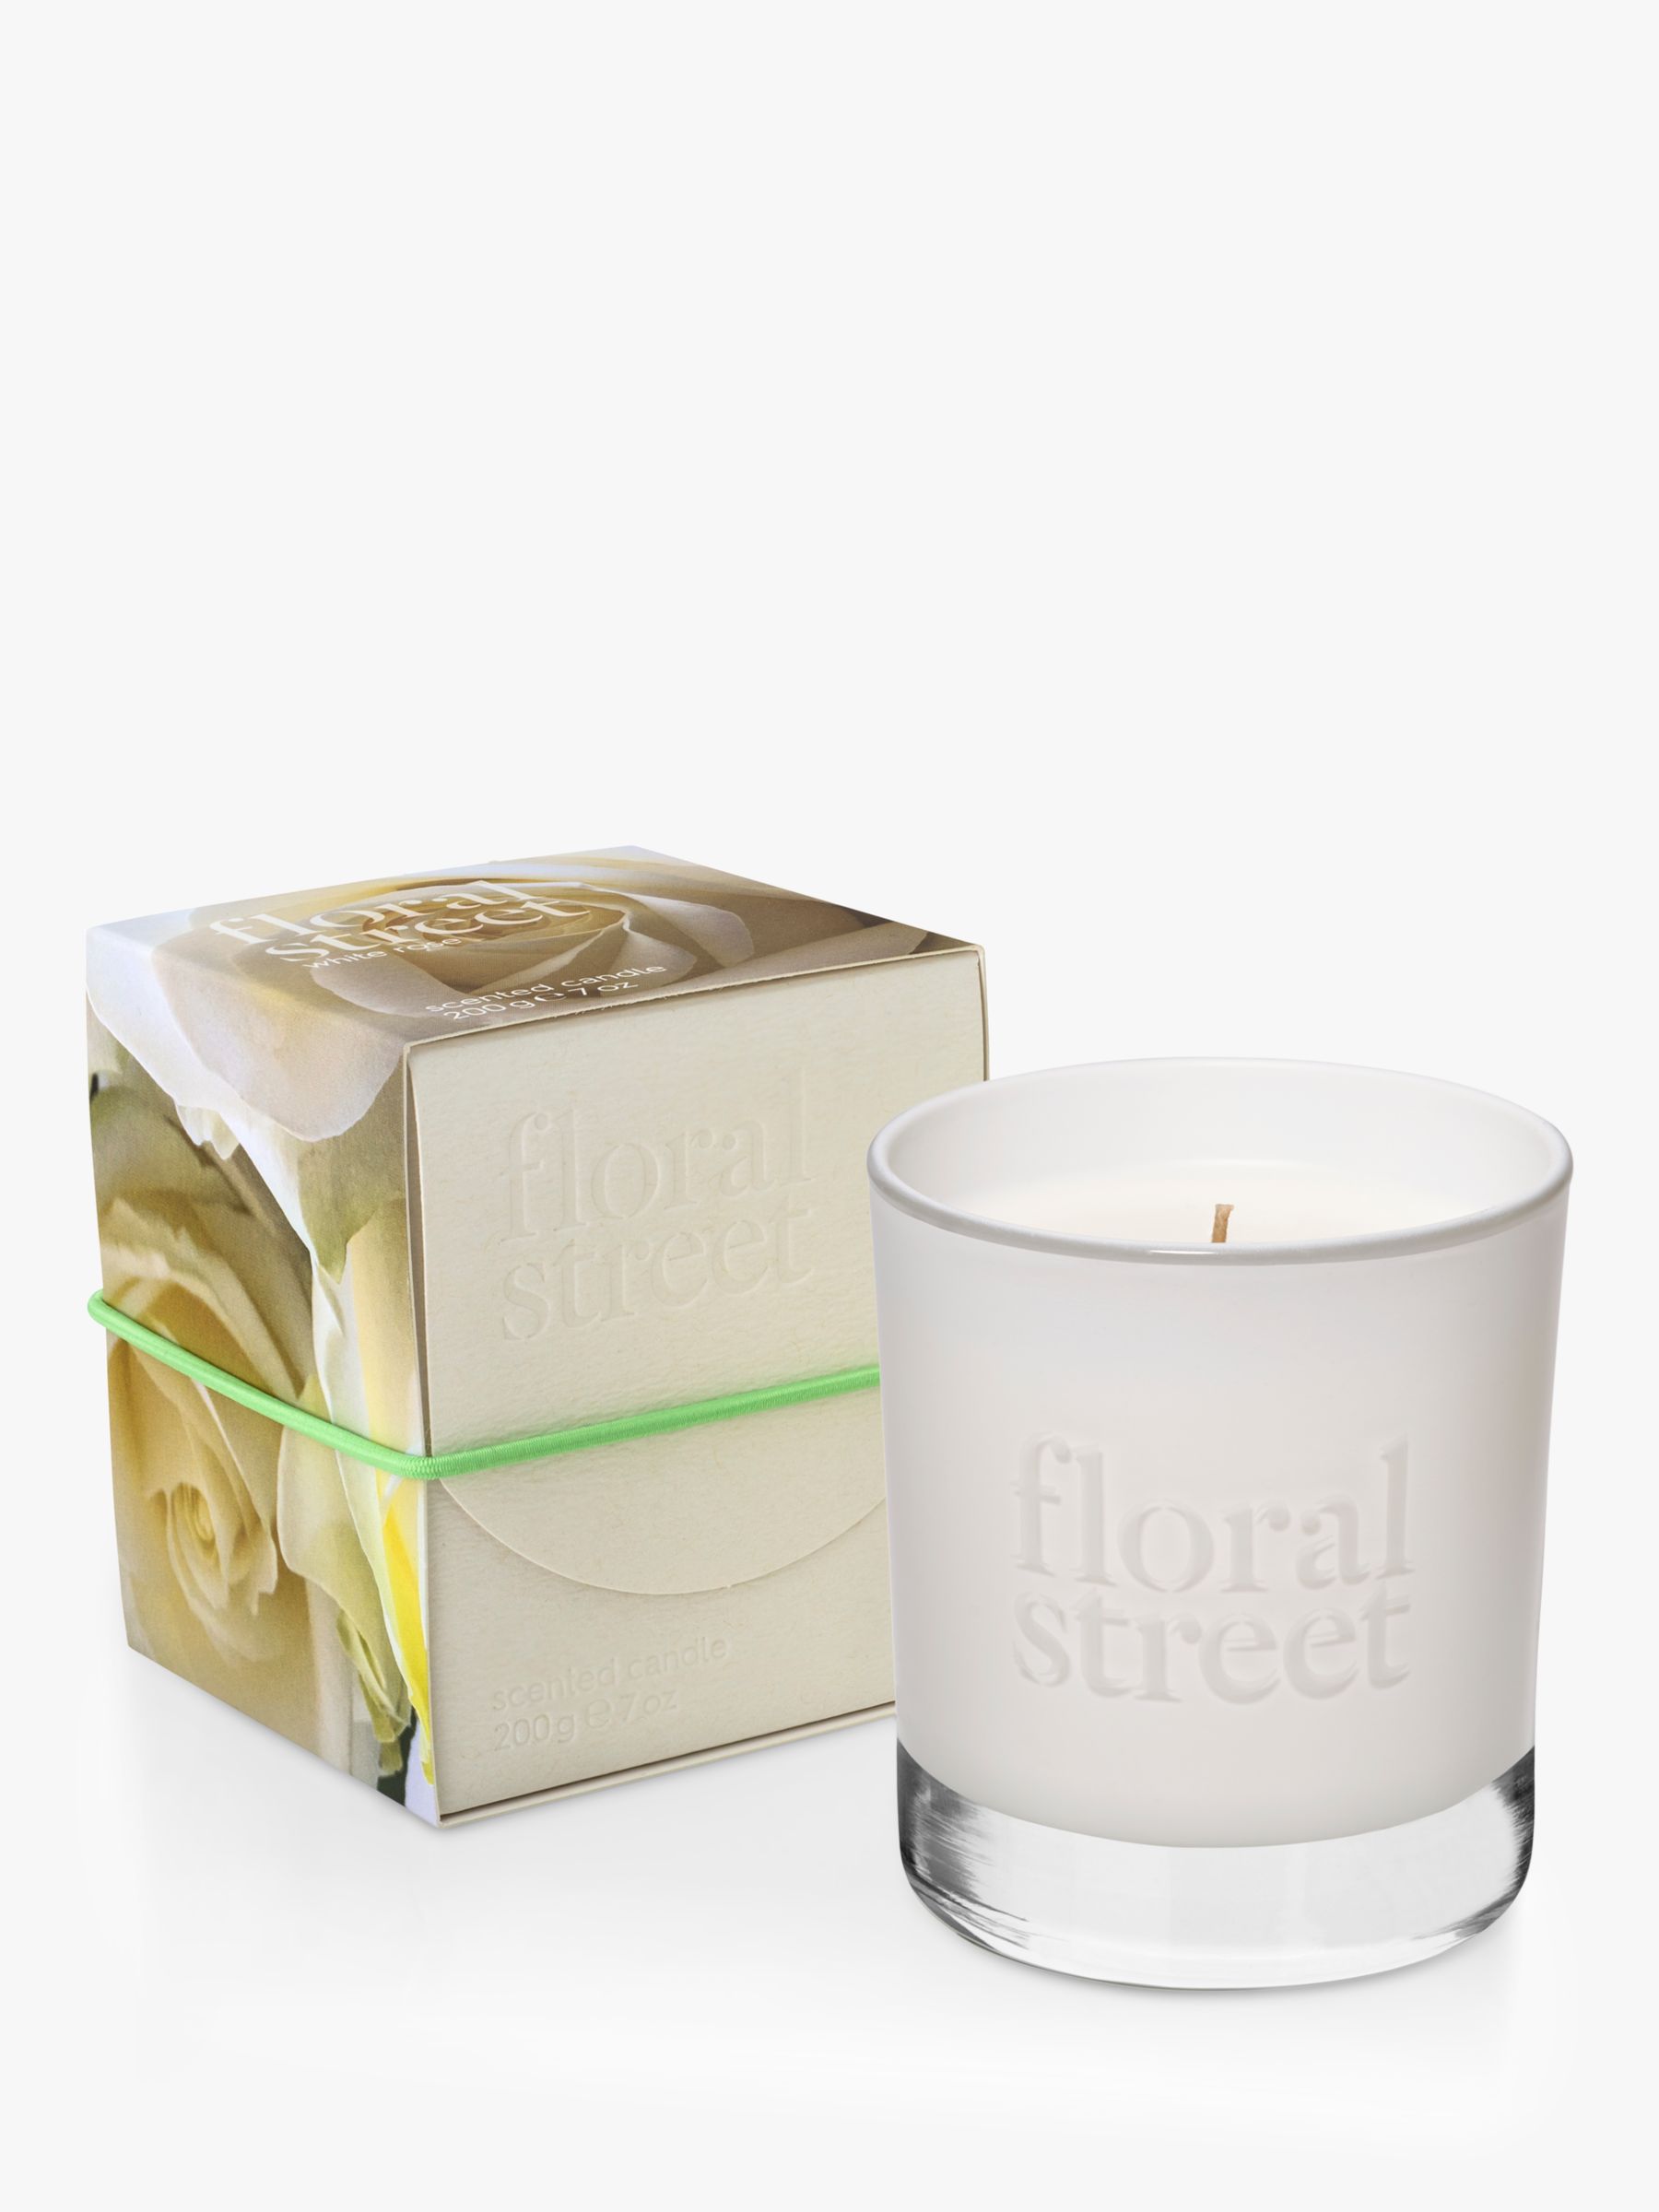 Floral Street White Rose Scented Candle, 200g